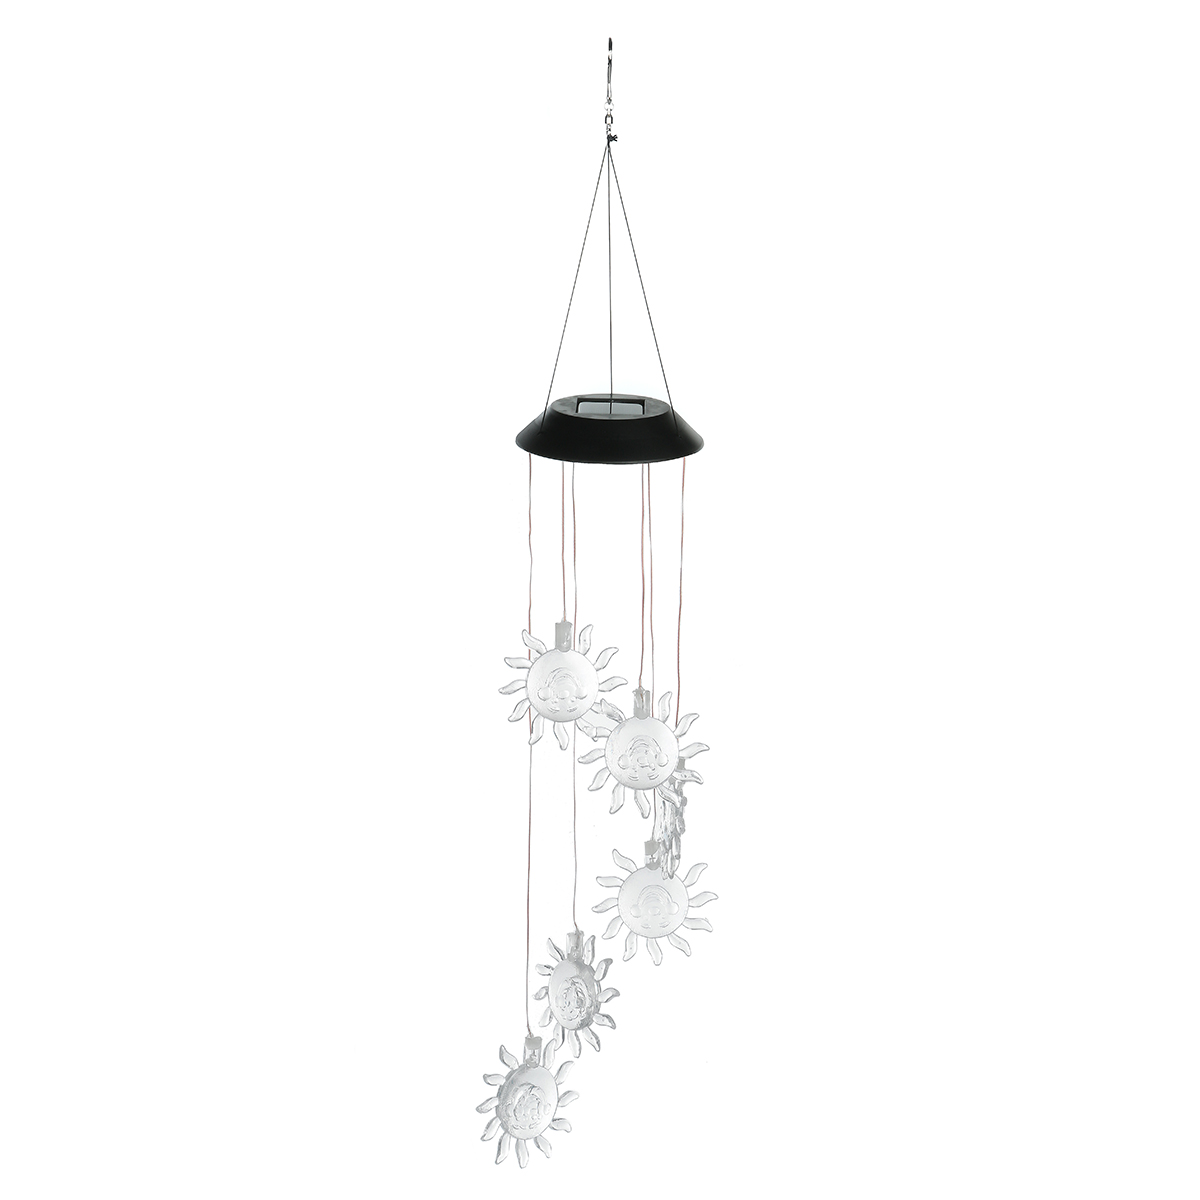 Color-Changing-LED-Solar-Powered-Wind-Chime-Light-Hanging-Garden-Yard-Decor-1760795-16